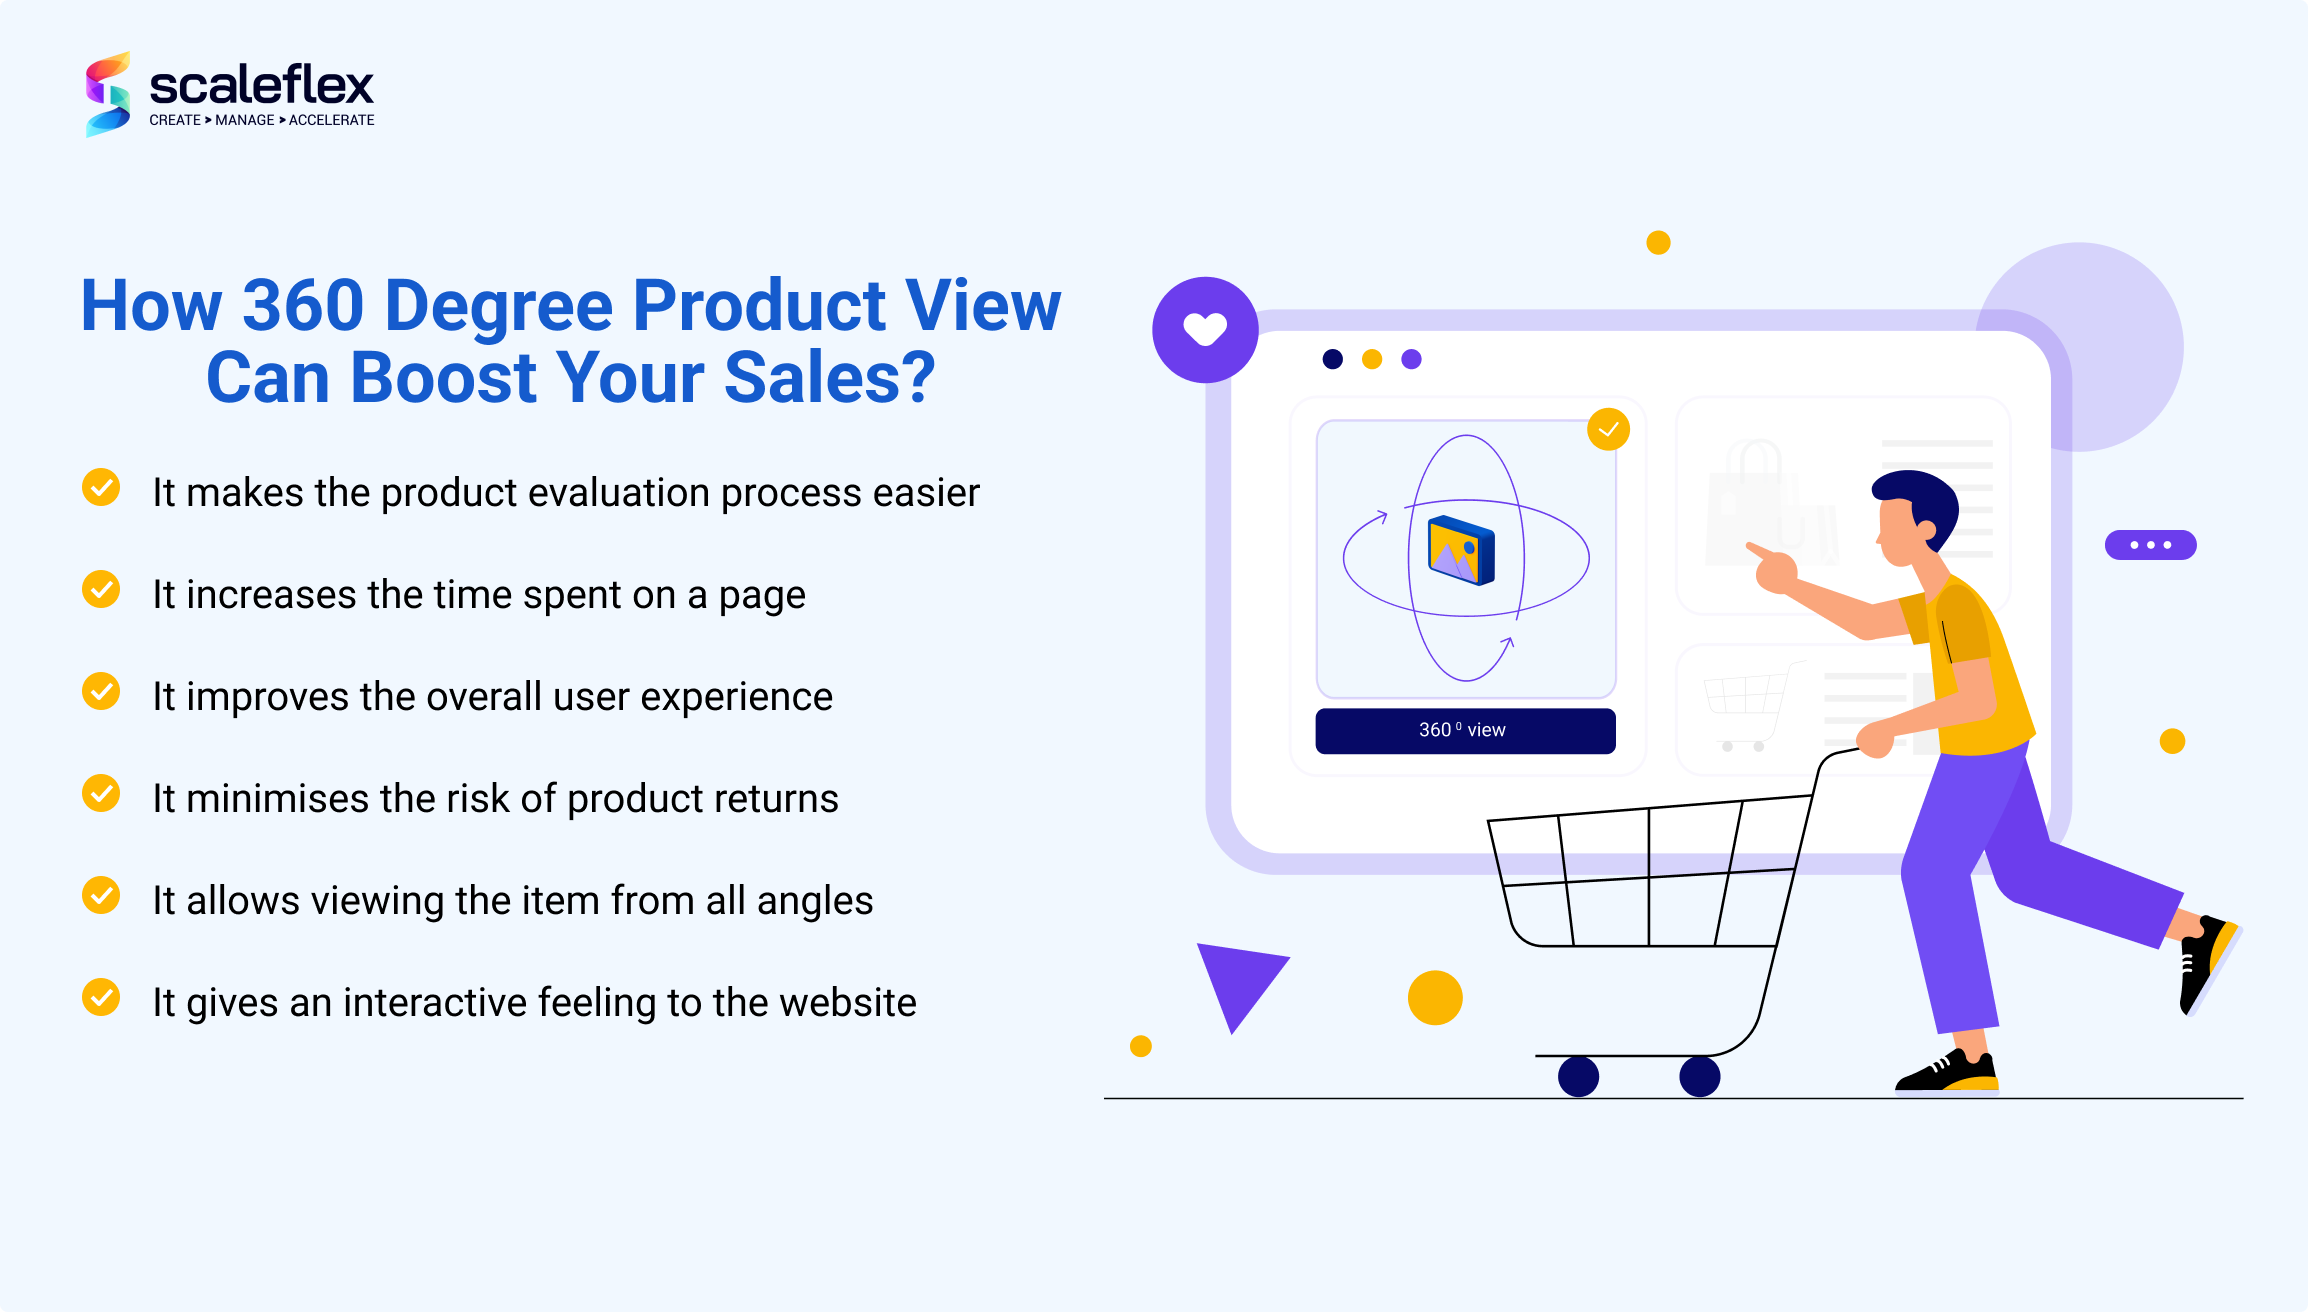 Benefits of 360 degree product view